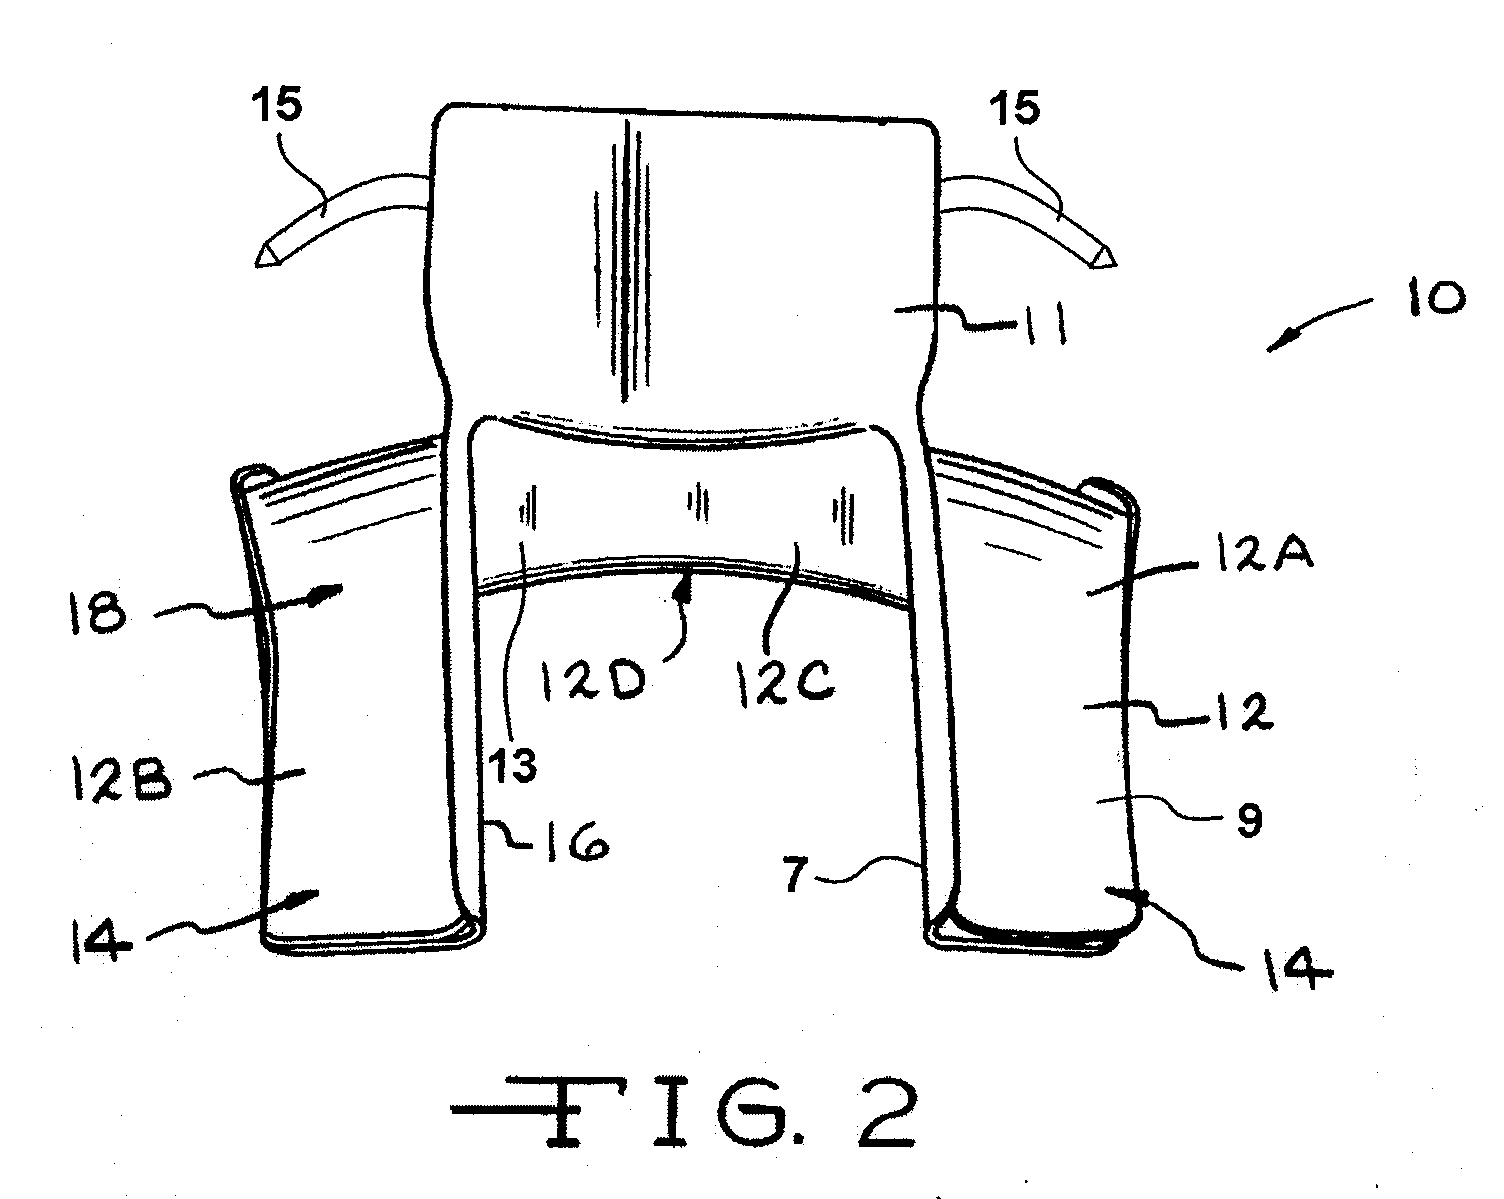 Head and neck support device